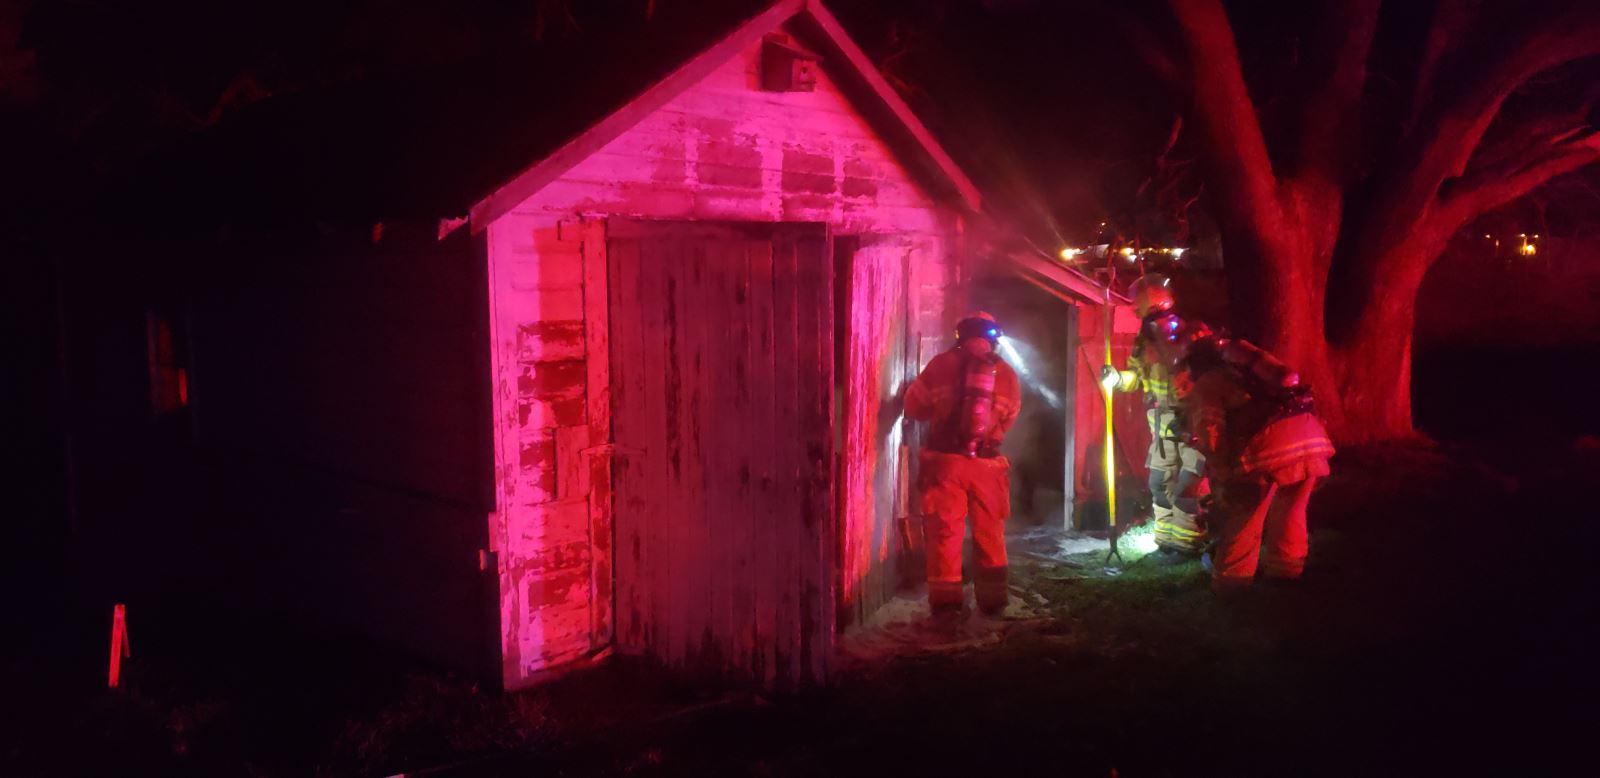 Firefighters extinguish a barn fire